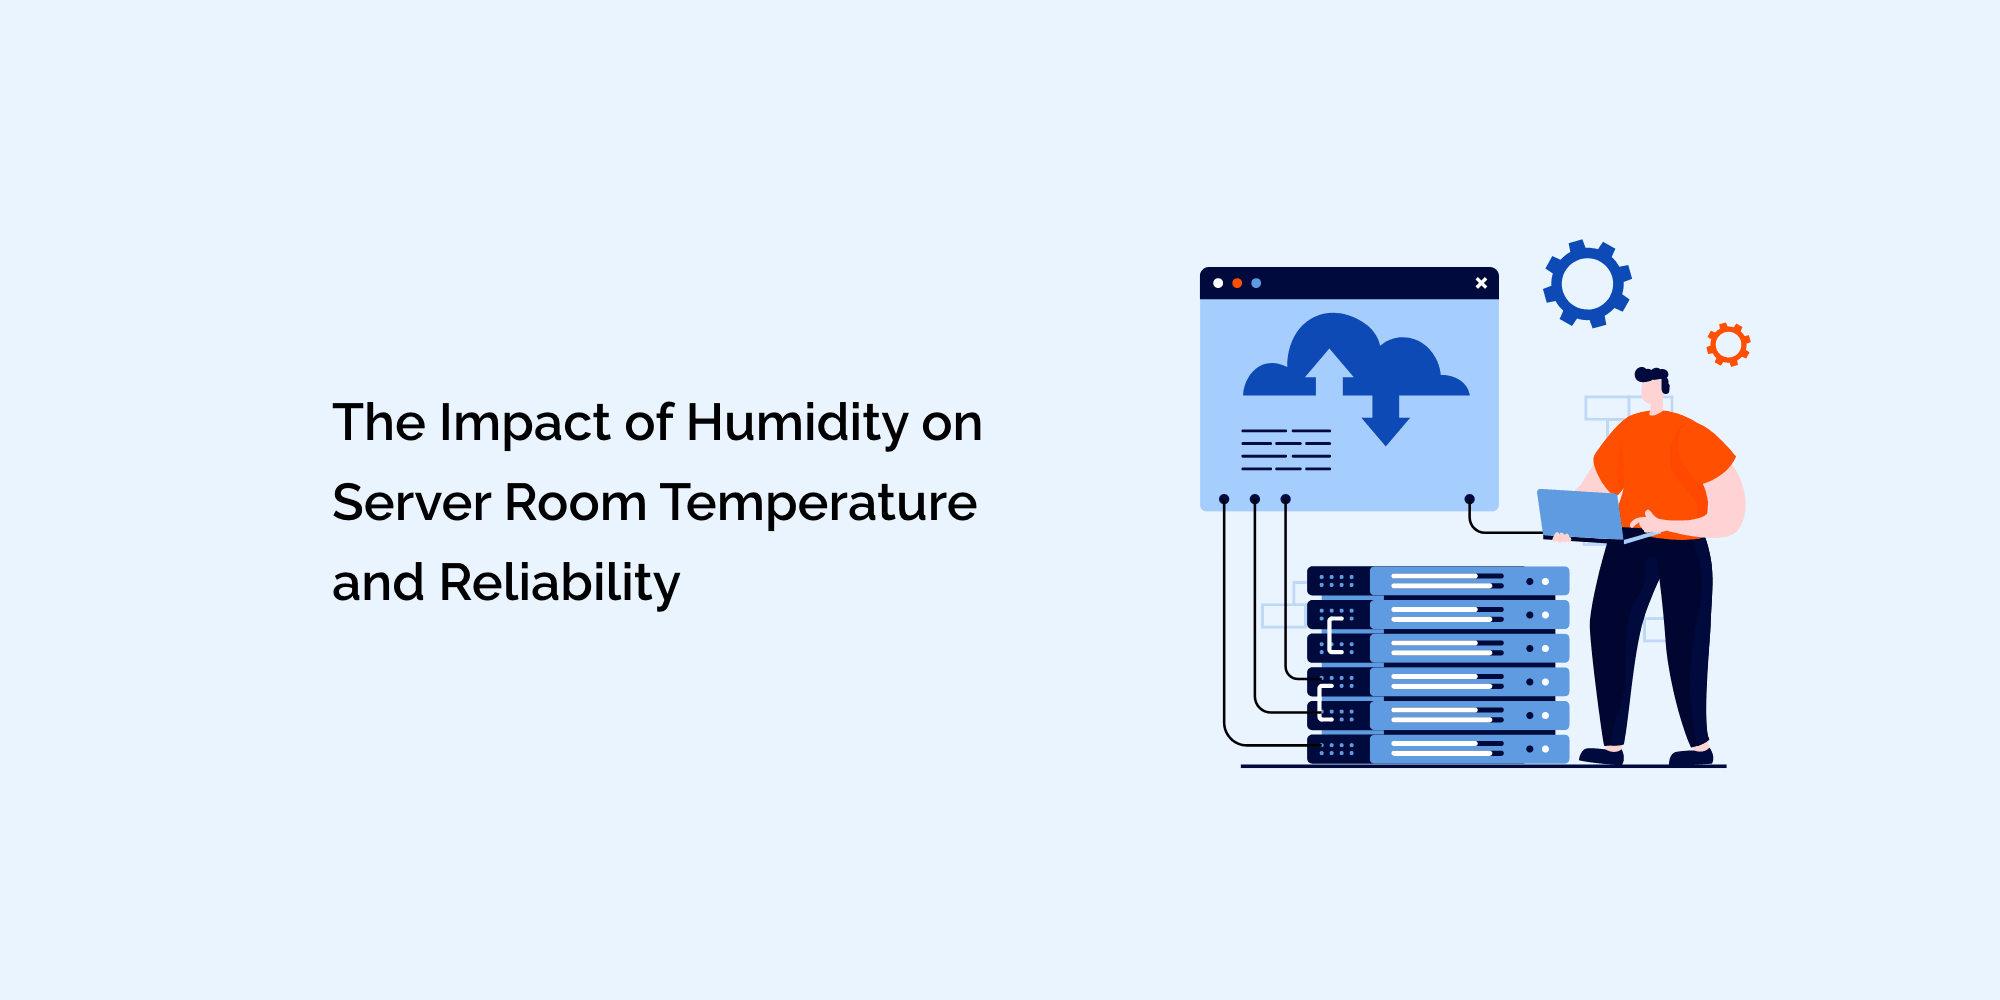 The Impact of Humidity on Server Room Temperature and Reliability